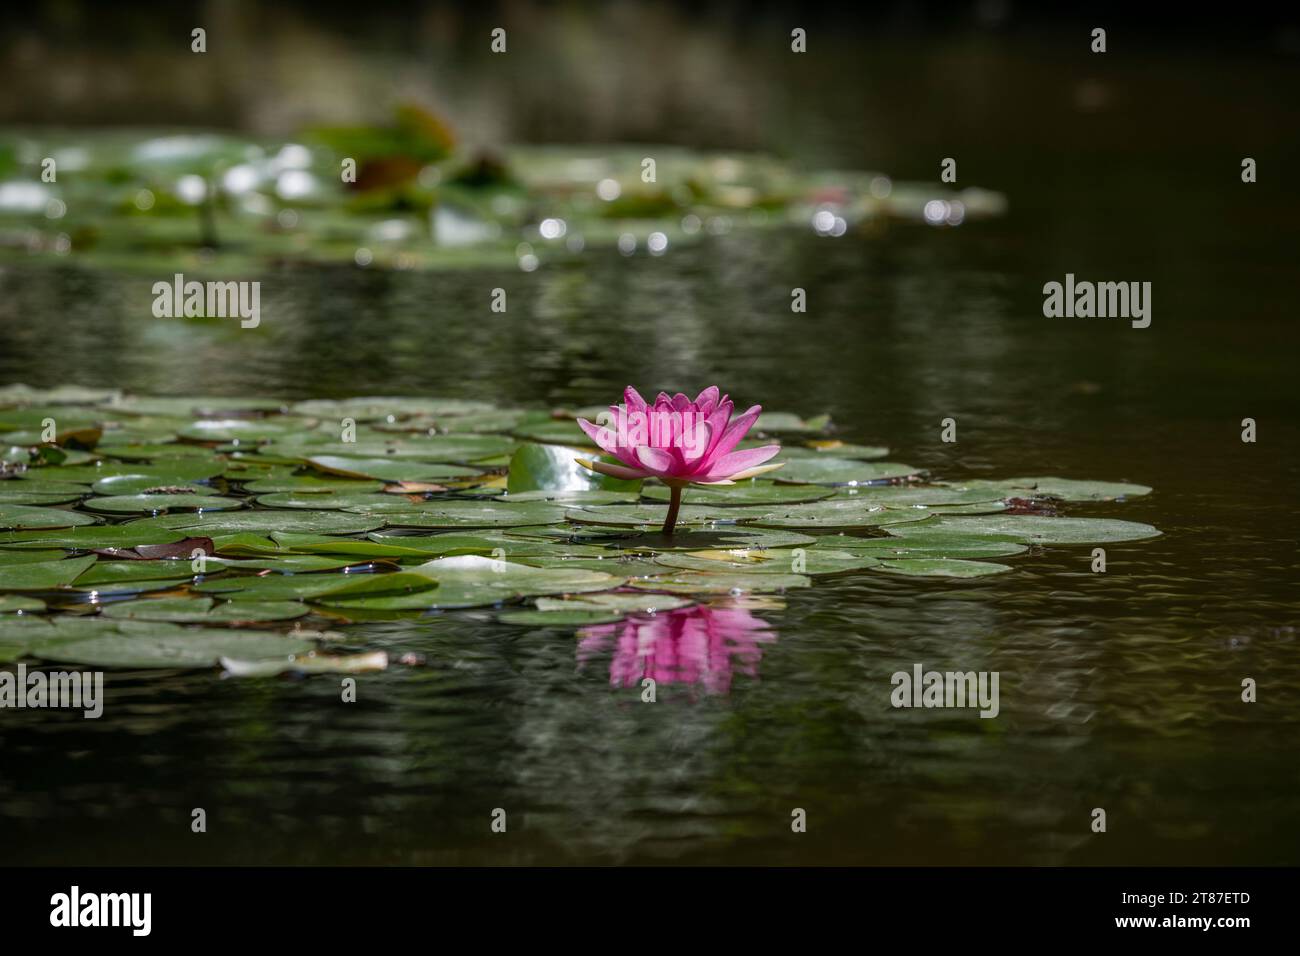 Detail shot of single pink water lily in small pond surrounded by green leaves Stock Photo